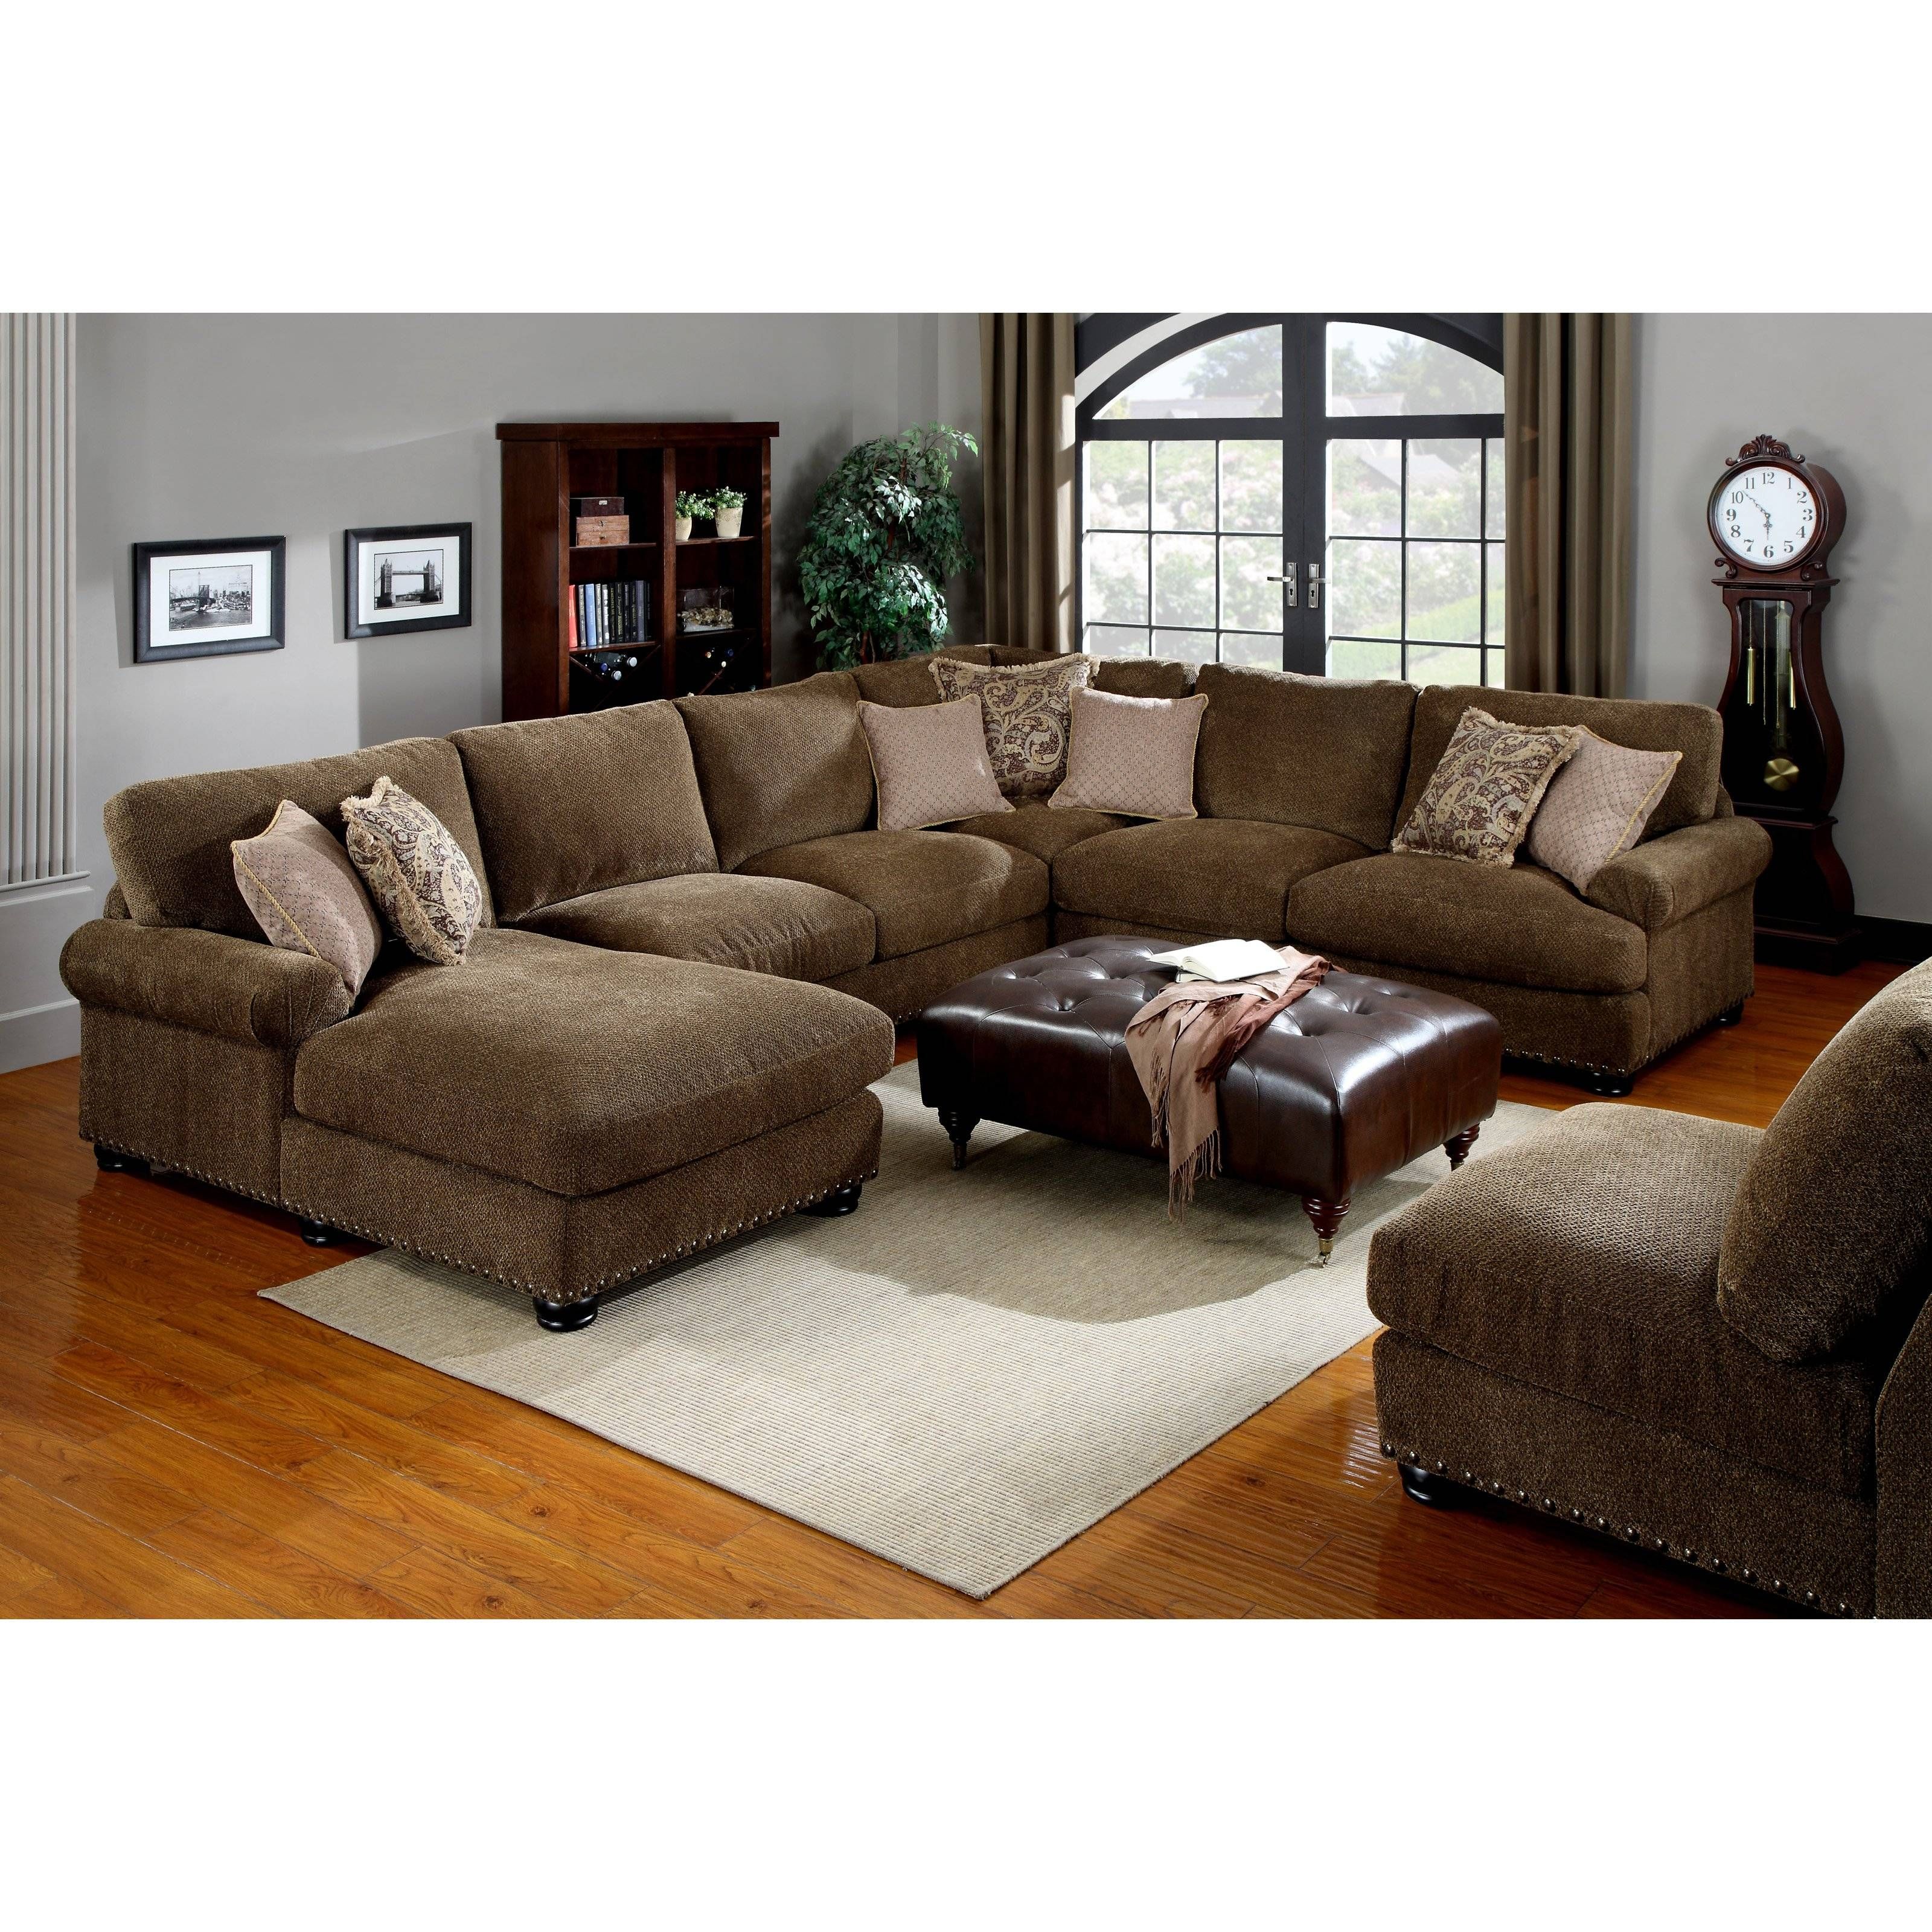 Chenille Sectional Sofa With Chaise With Concept Image 21936 For Chenille Sectional Sofas (View 1 of 30)